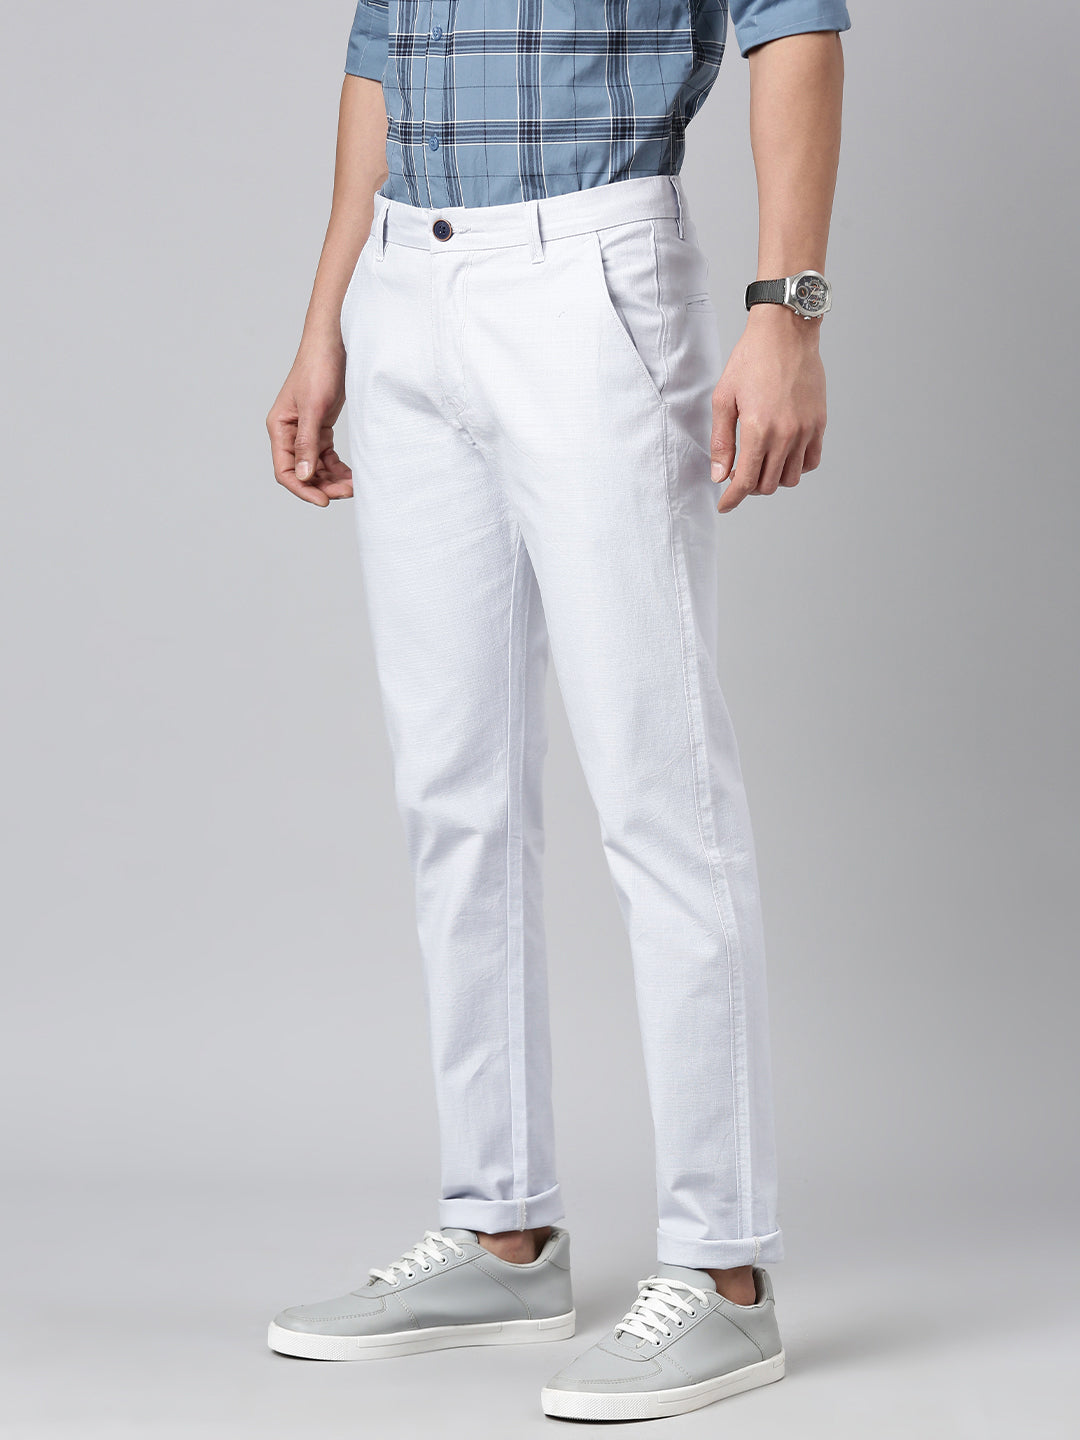 Majestic Man Regular Fit Solid Casual Trouser - Light Blue